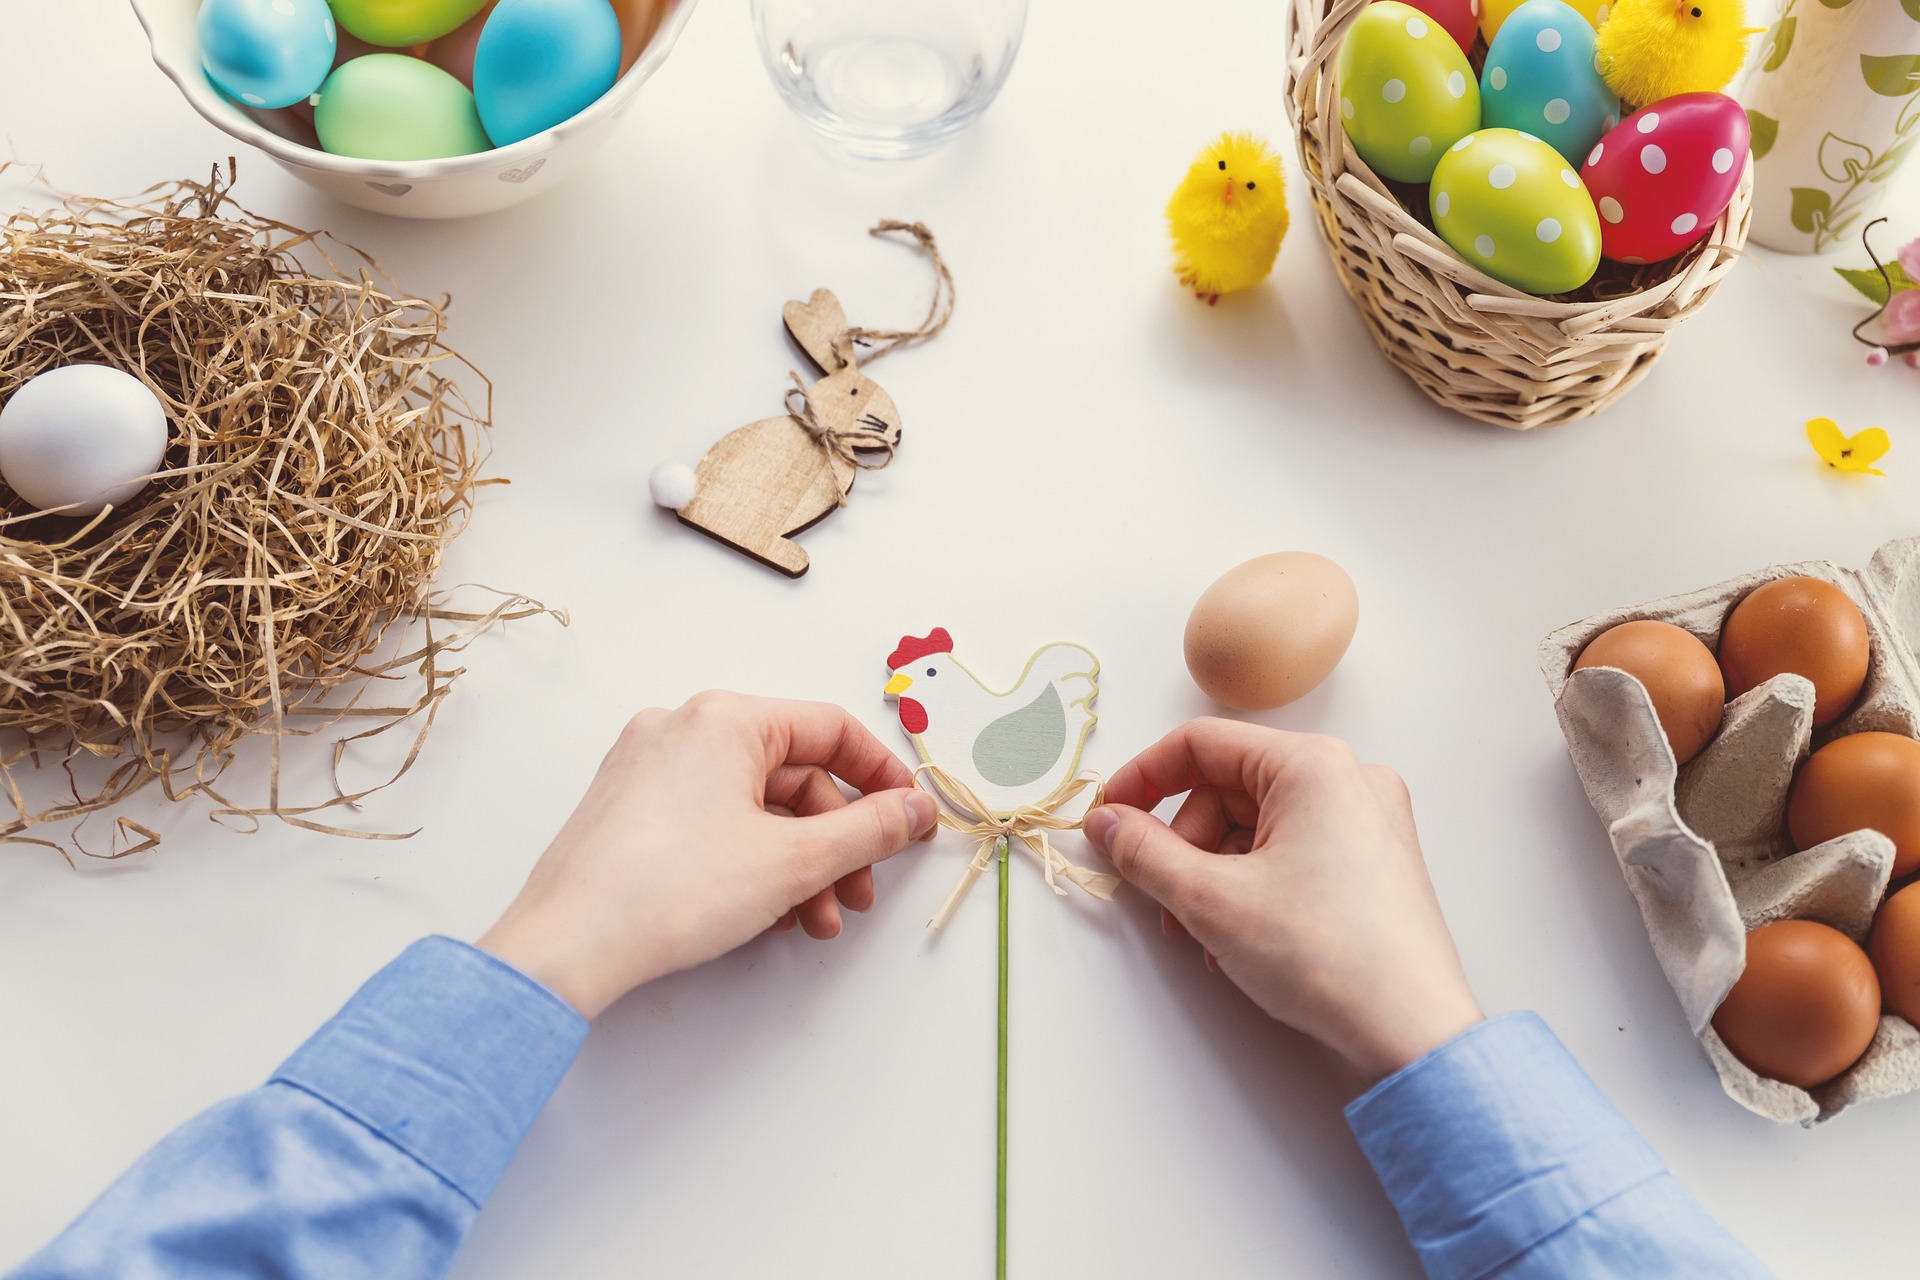 Course Image for 8040C2221 Family Fun:: Easter Crafts (Workshop)